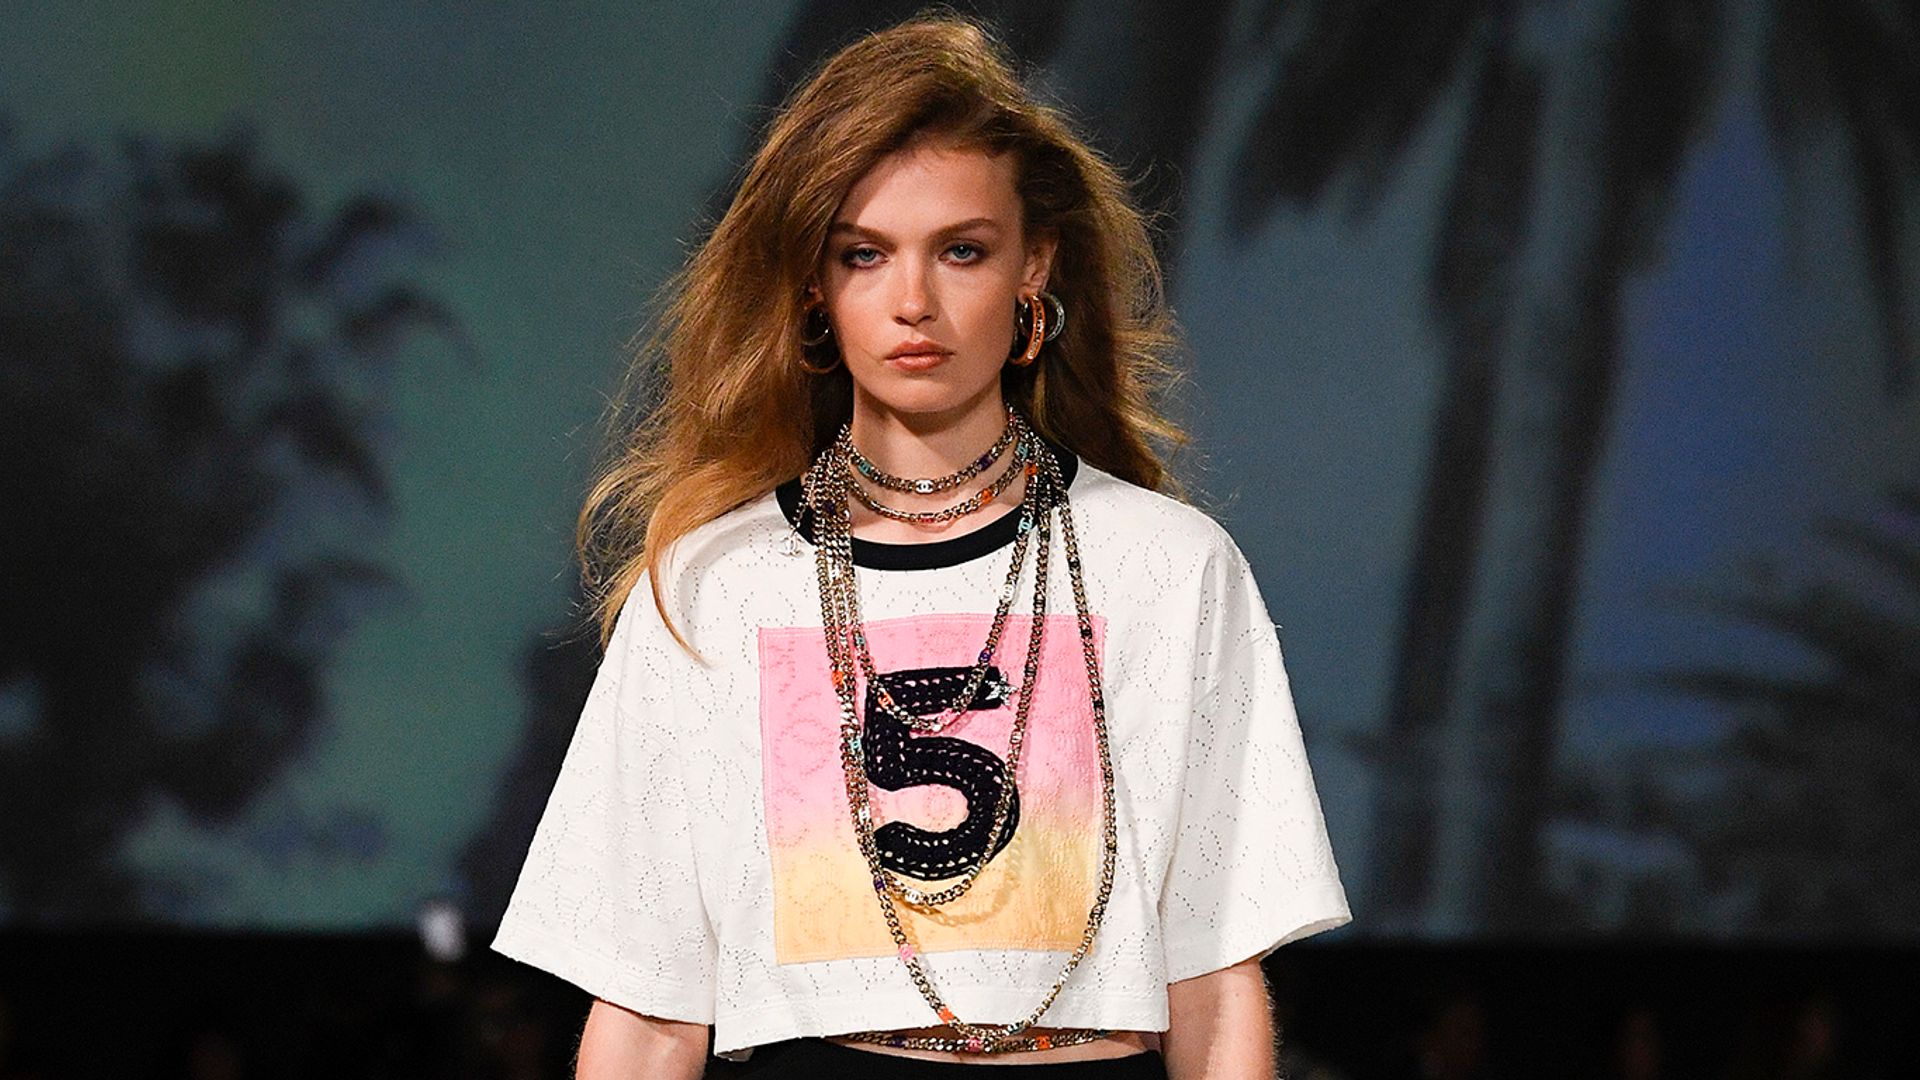 Chanel's LA Cruise show just brought back the 90s supermodel blow dry